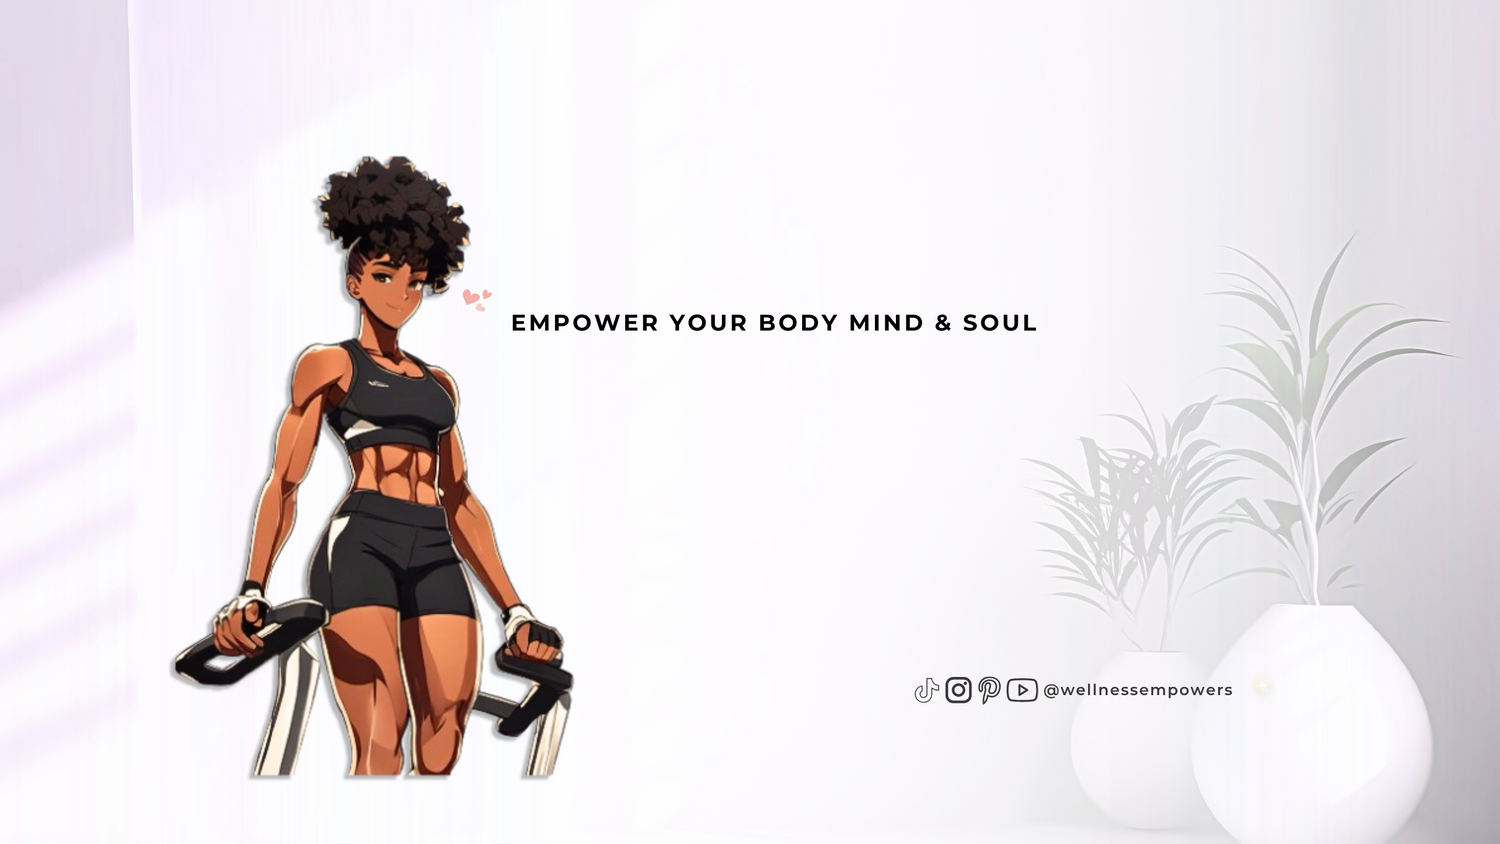 EMPOWER YOUR BODY